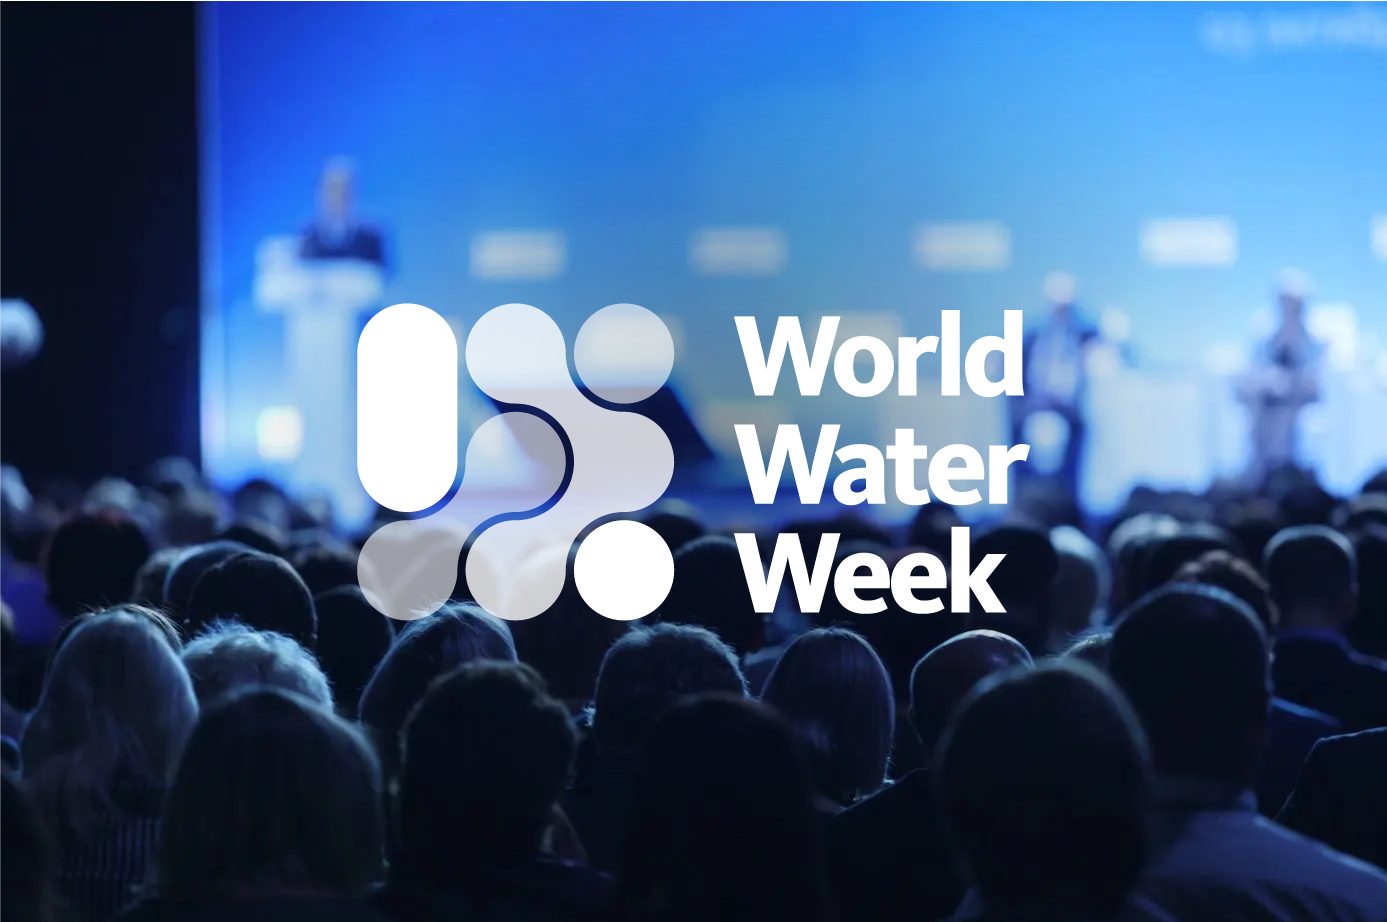 Crowd seen from the back with people speaking on stage, blurred in the background. World Water Week logo on top of the image